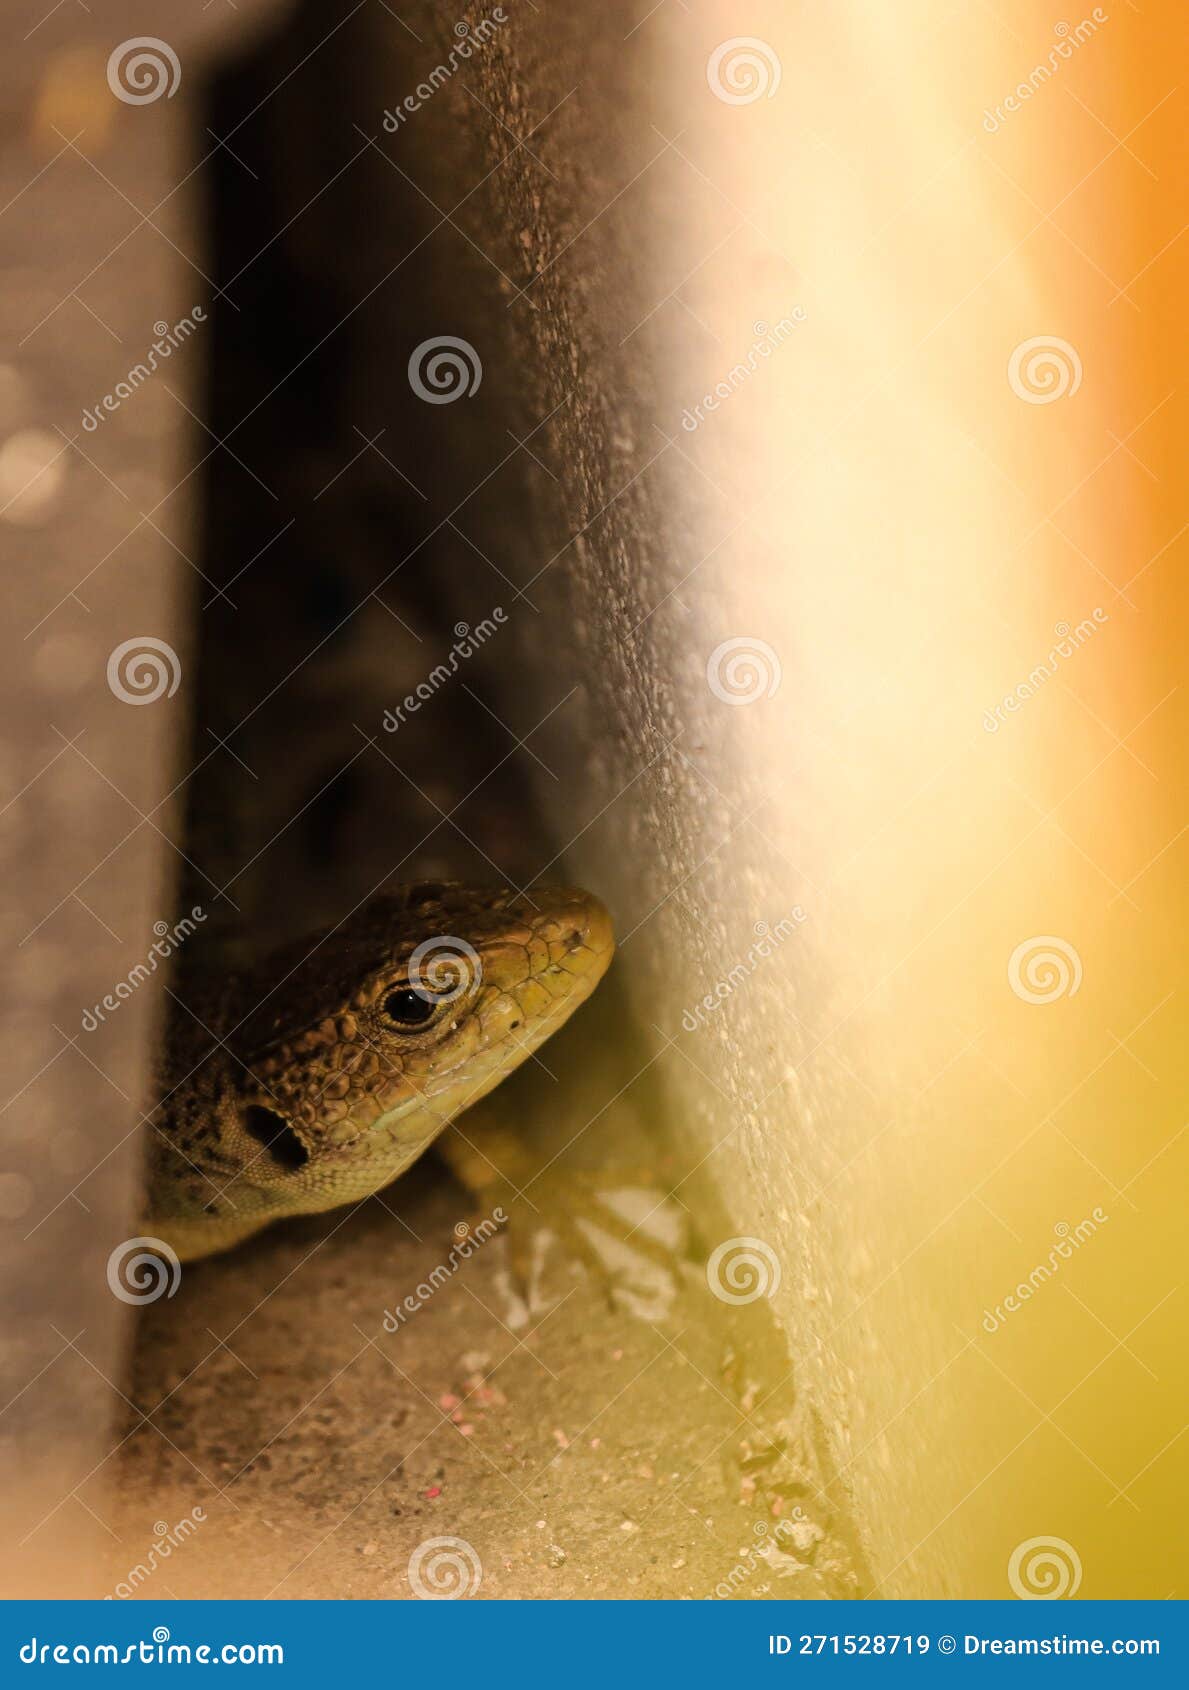 a lizard hides in a hole in a wall.